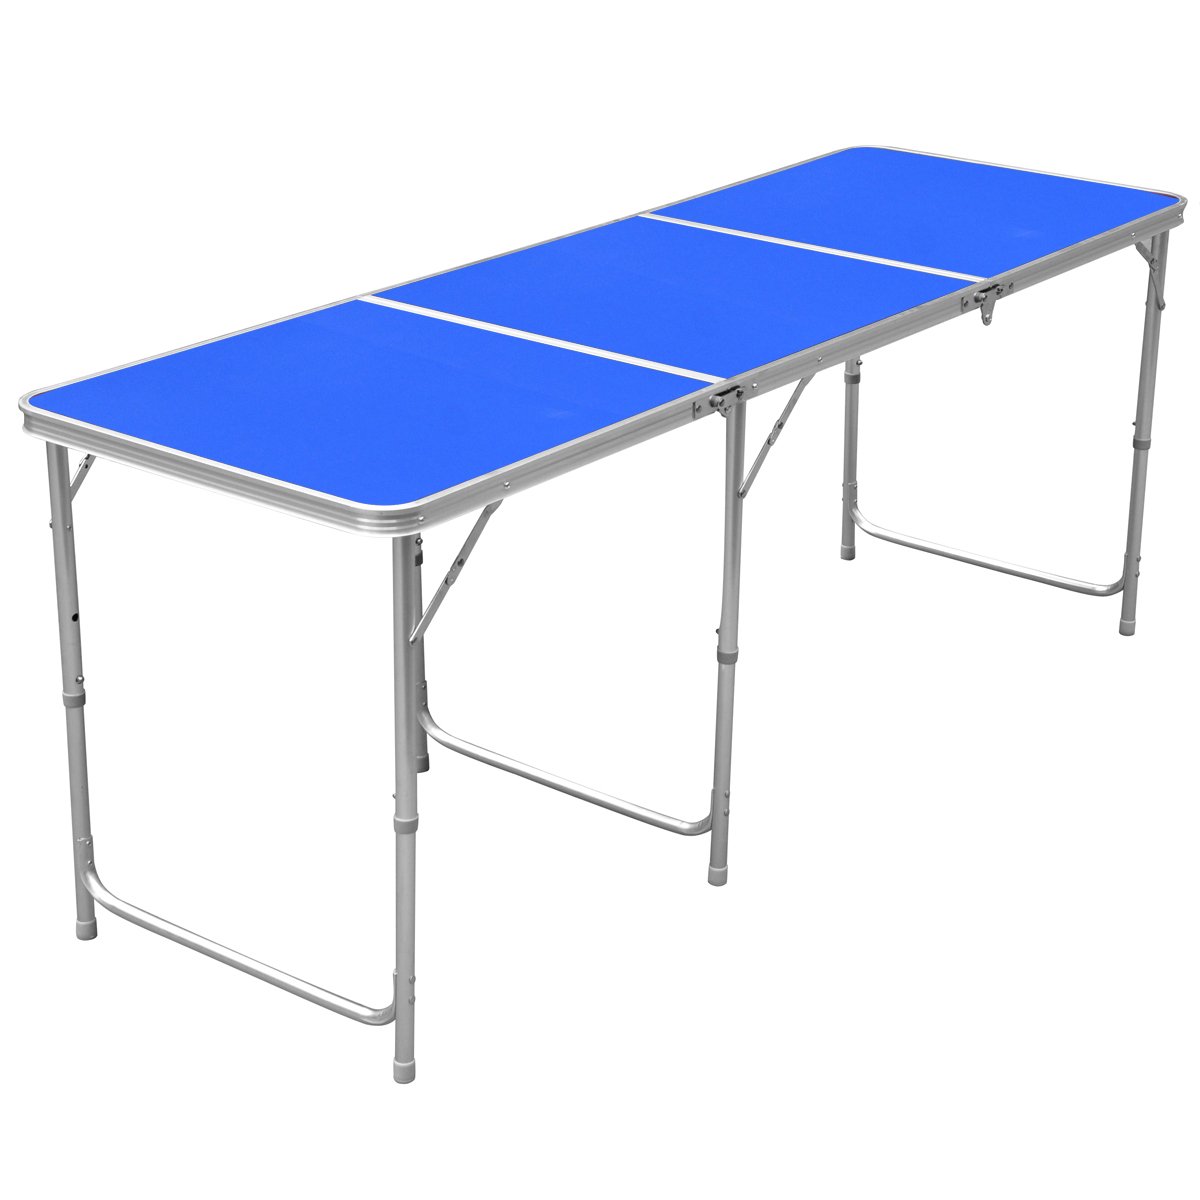 10x(1.8m/6ft Aluminum Portable Folding Camping Picnic Party Dining Table - L2A1